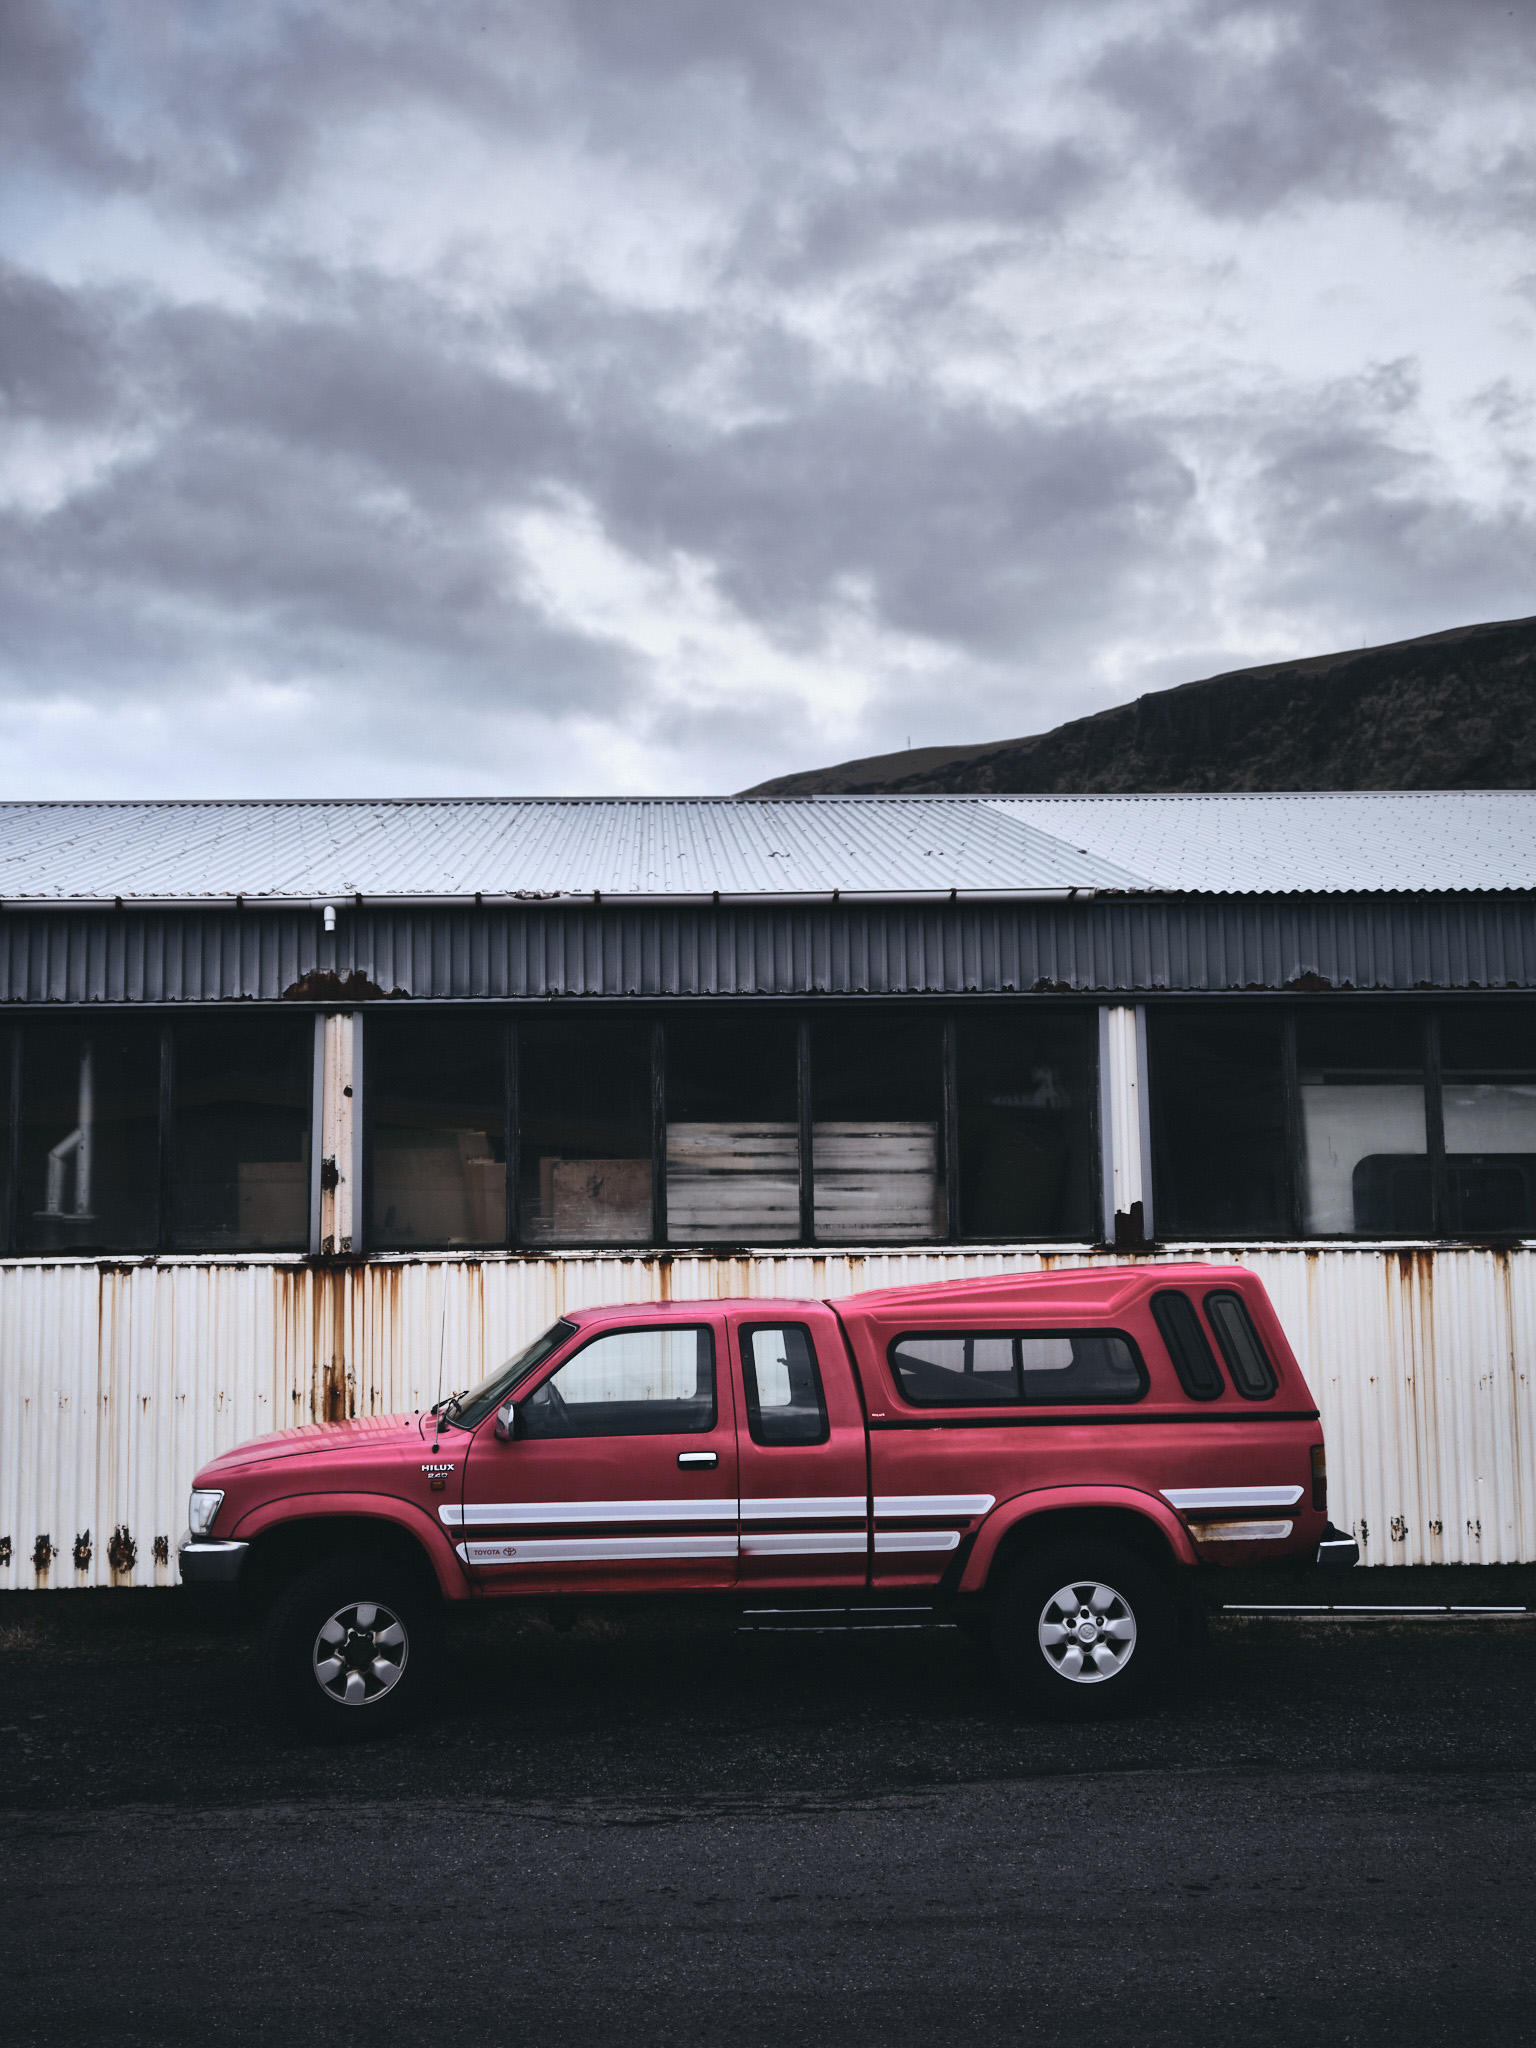 Street photo - Iceland - Old truck